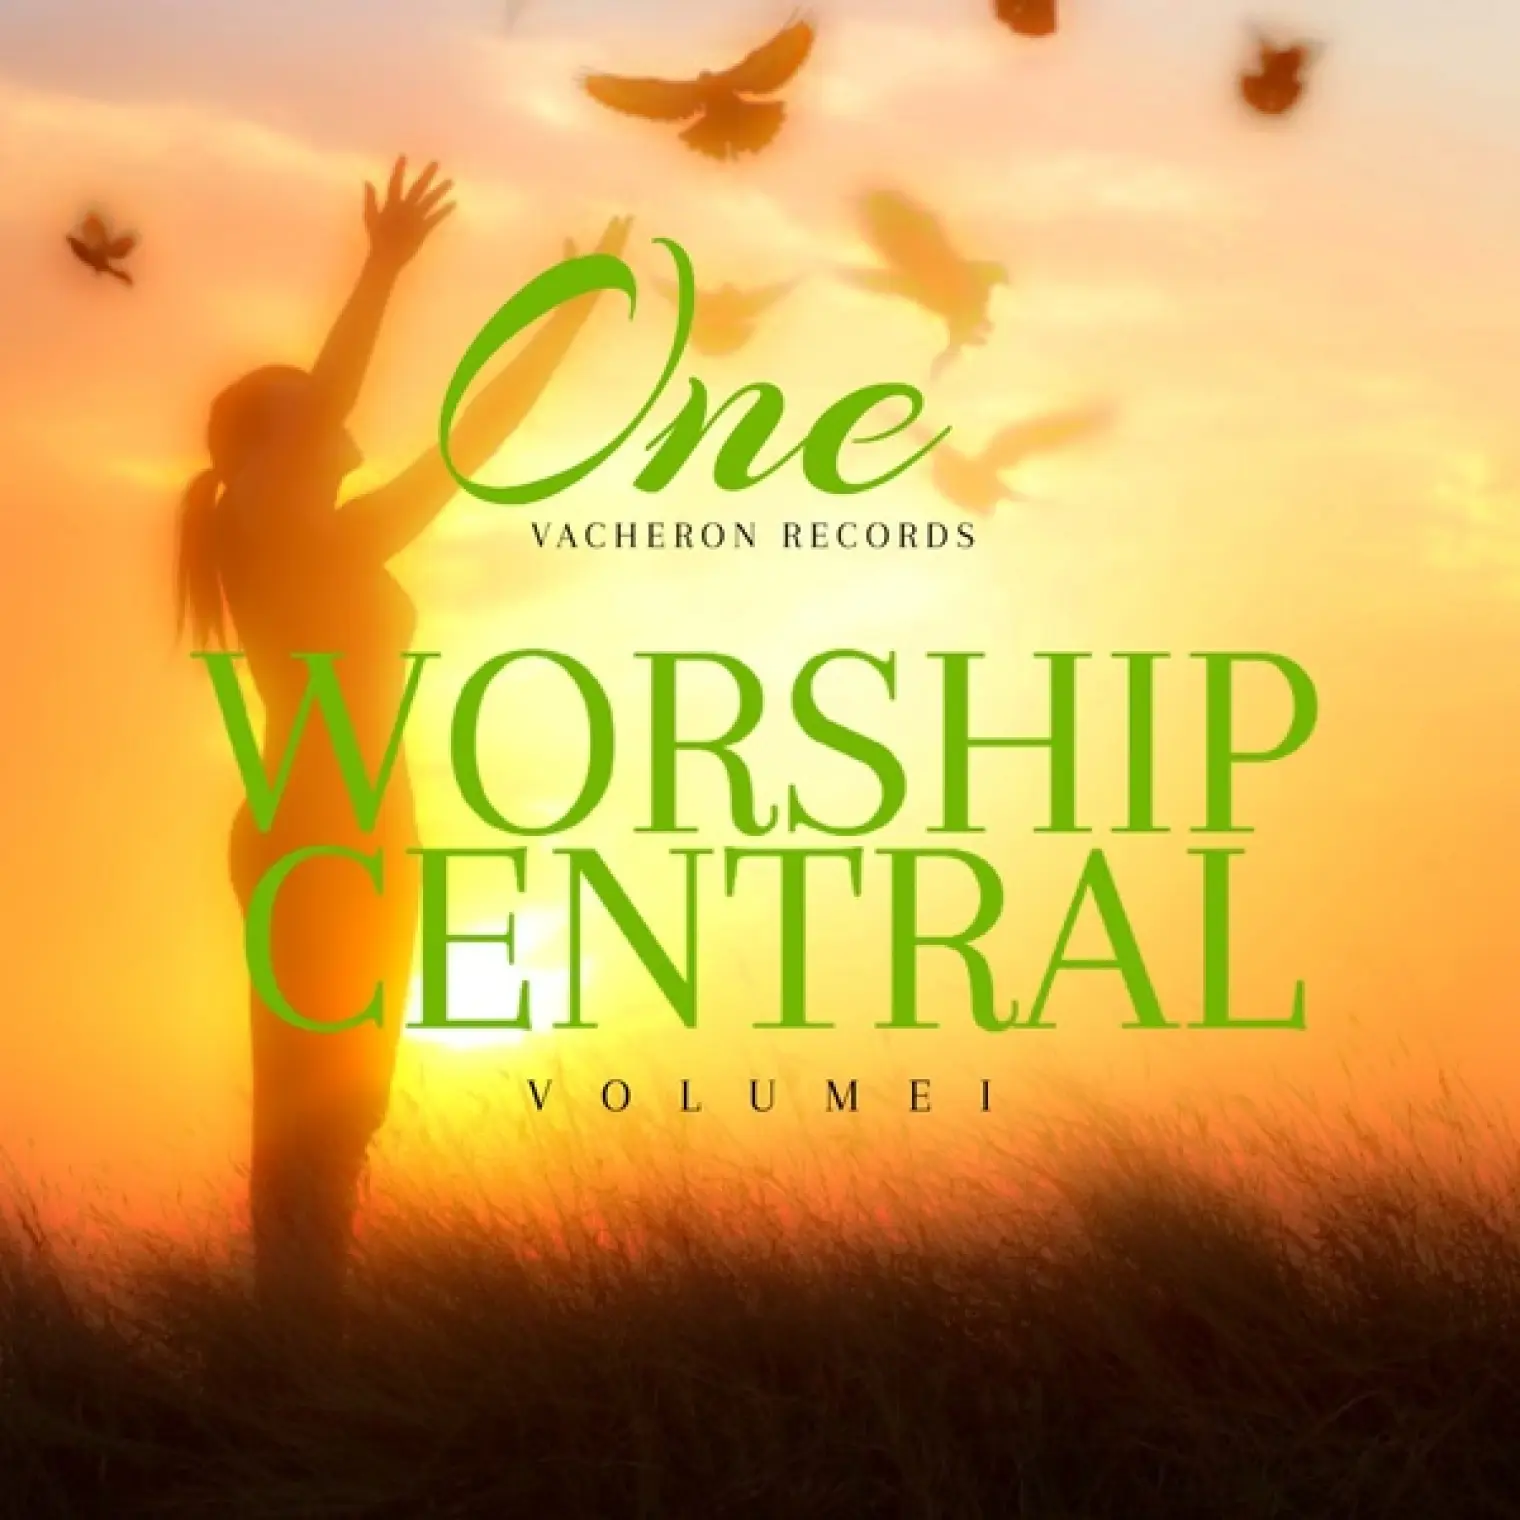 Worship Central, Vol. 2 -  One 